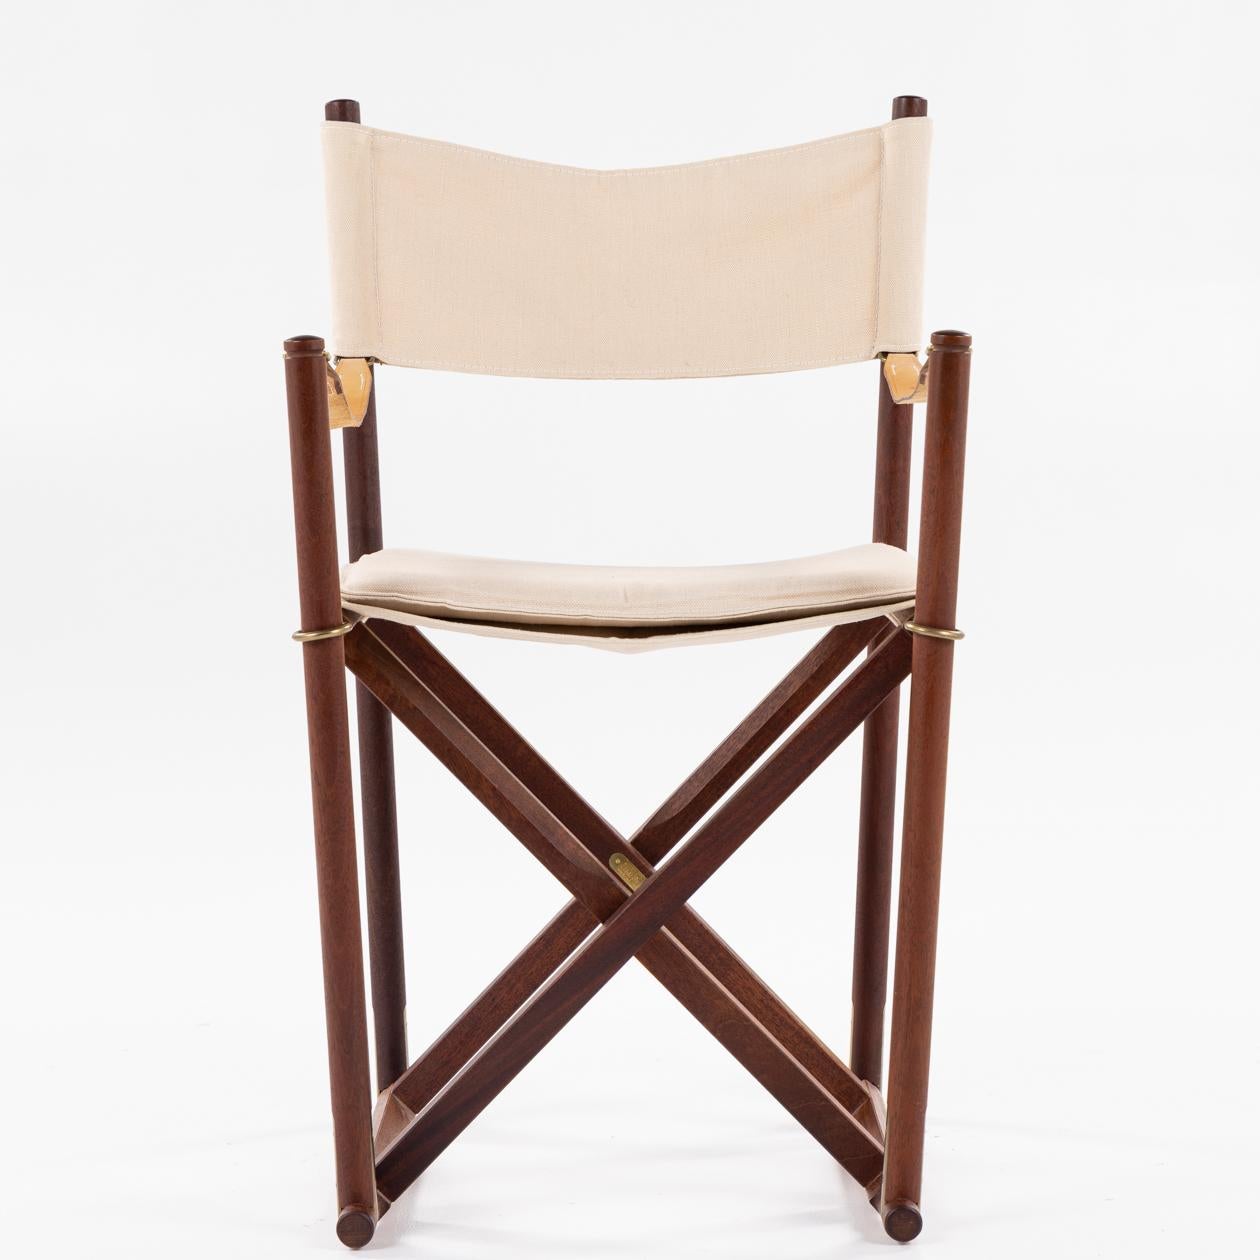 MK 16 - Set of 6 instructor/folding chairs in mahogany and canvas with brass details.  Mogens Koch / Rud. Rasmussen.